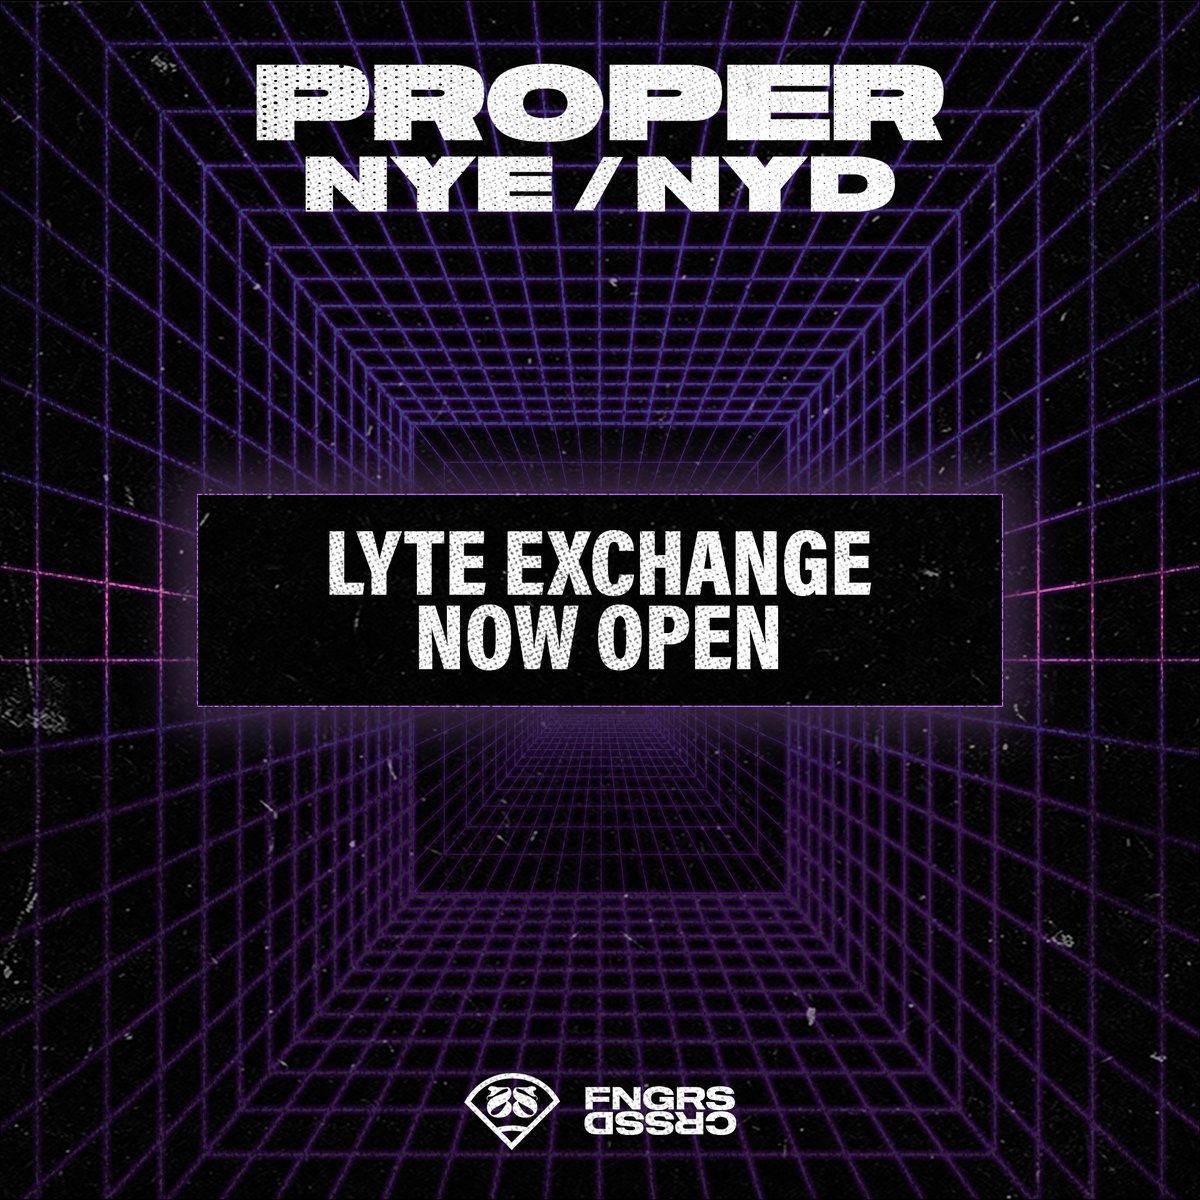 The @lyteup ticket exchange is now OPEN 🪩 Through this fan-to-fan platform, you can safely and securely purchase and sell verified #ProperNYE tickets ⚡ LYTE EXCHANGE: crssdpropernye.lyte.com/3707785